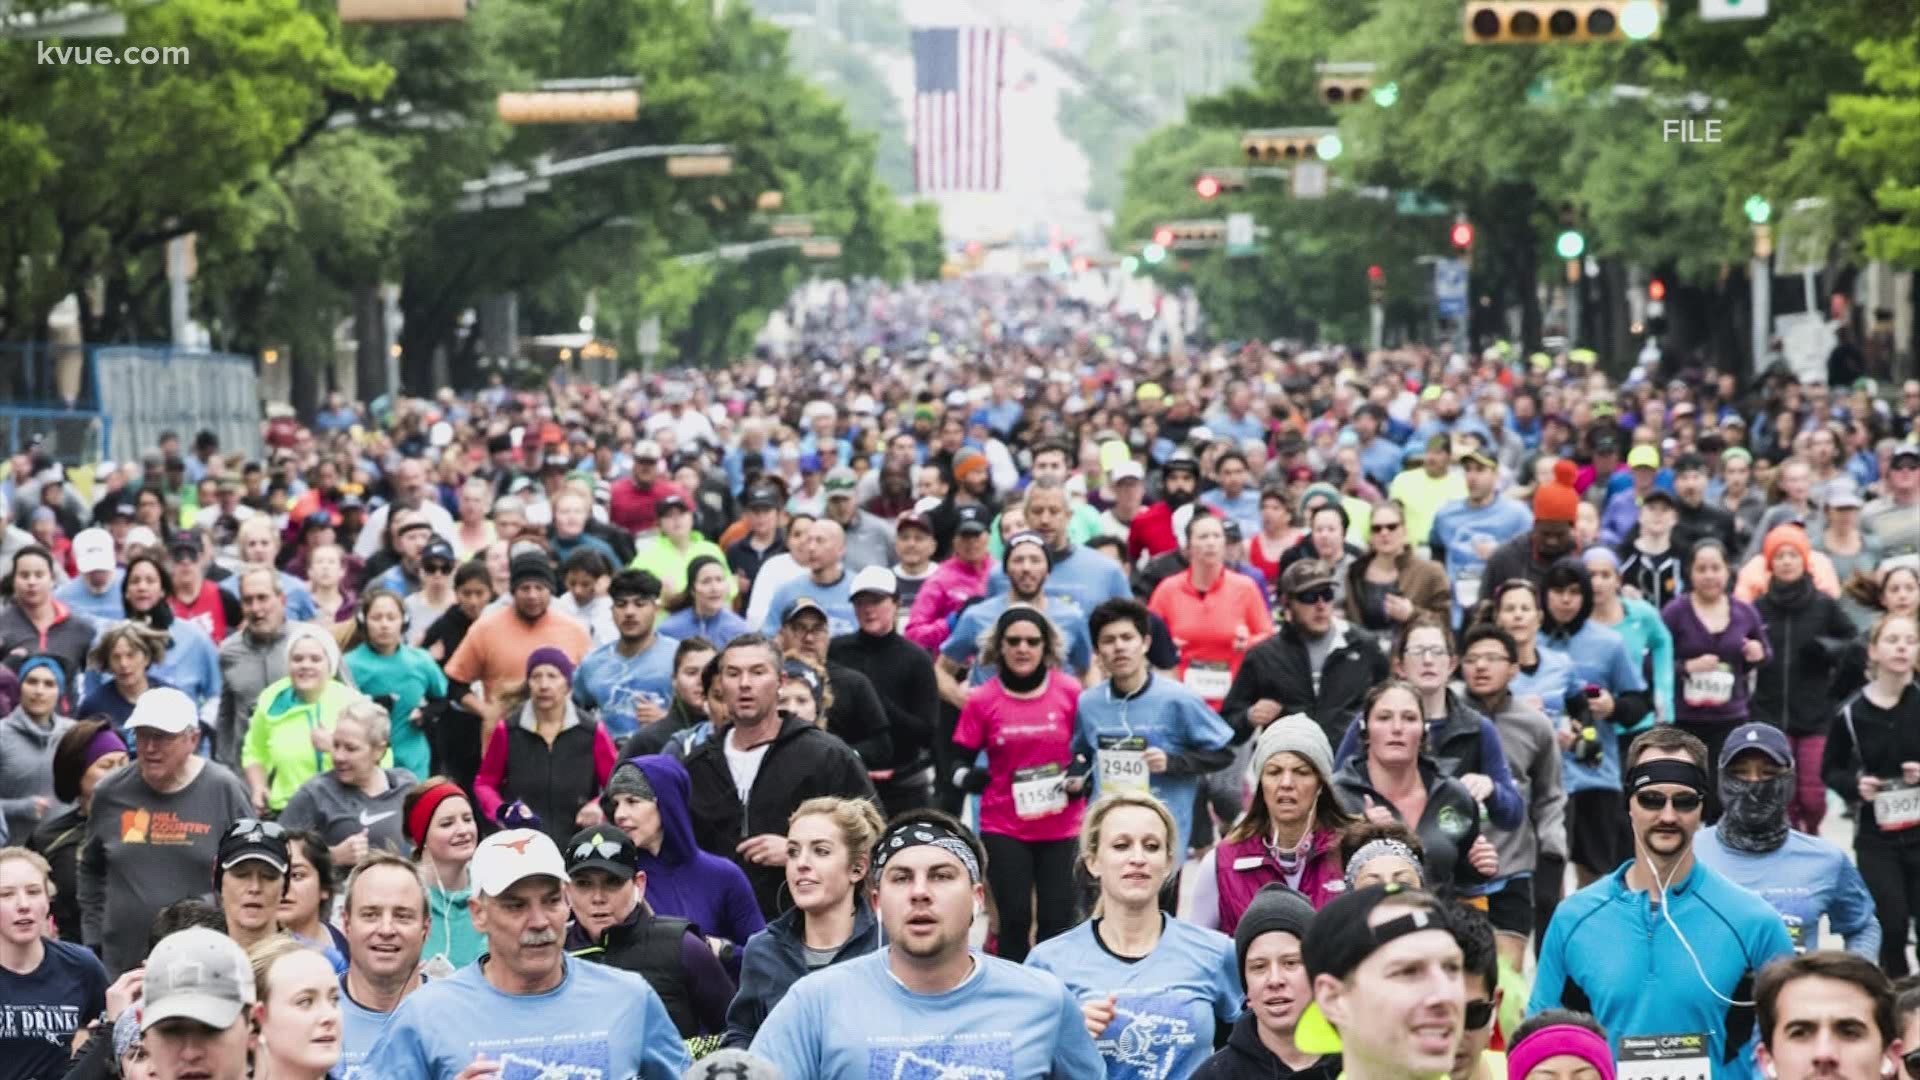 The 44th Statesman Cap10K race will be virtual instead of in-person this year. Participants can run the race virtually from April 11 through April 30.